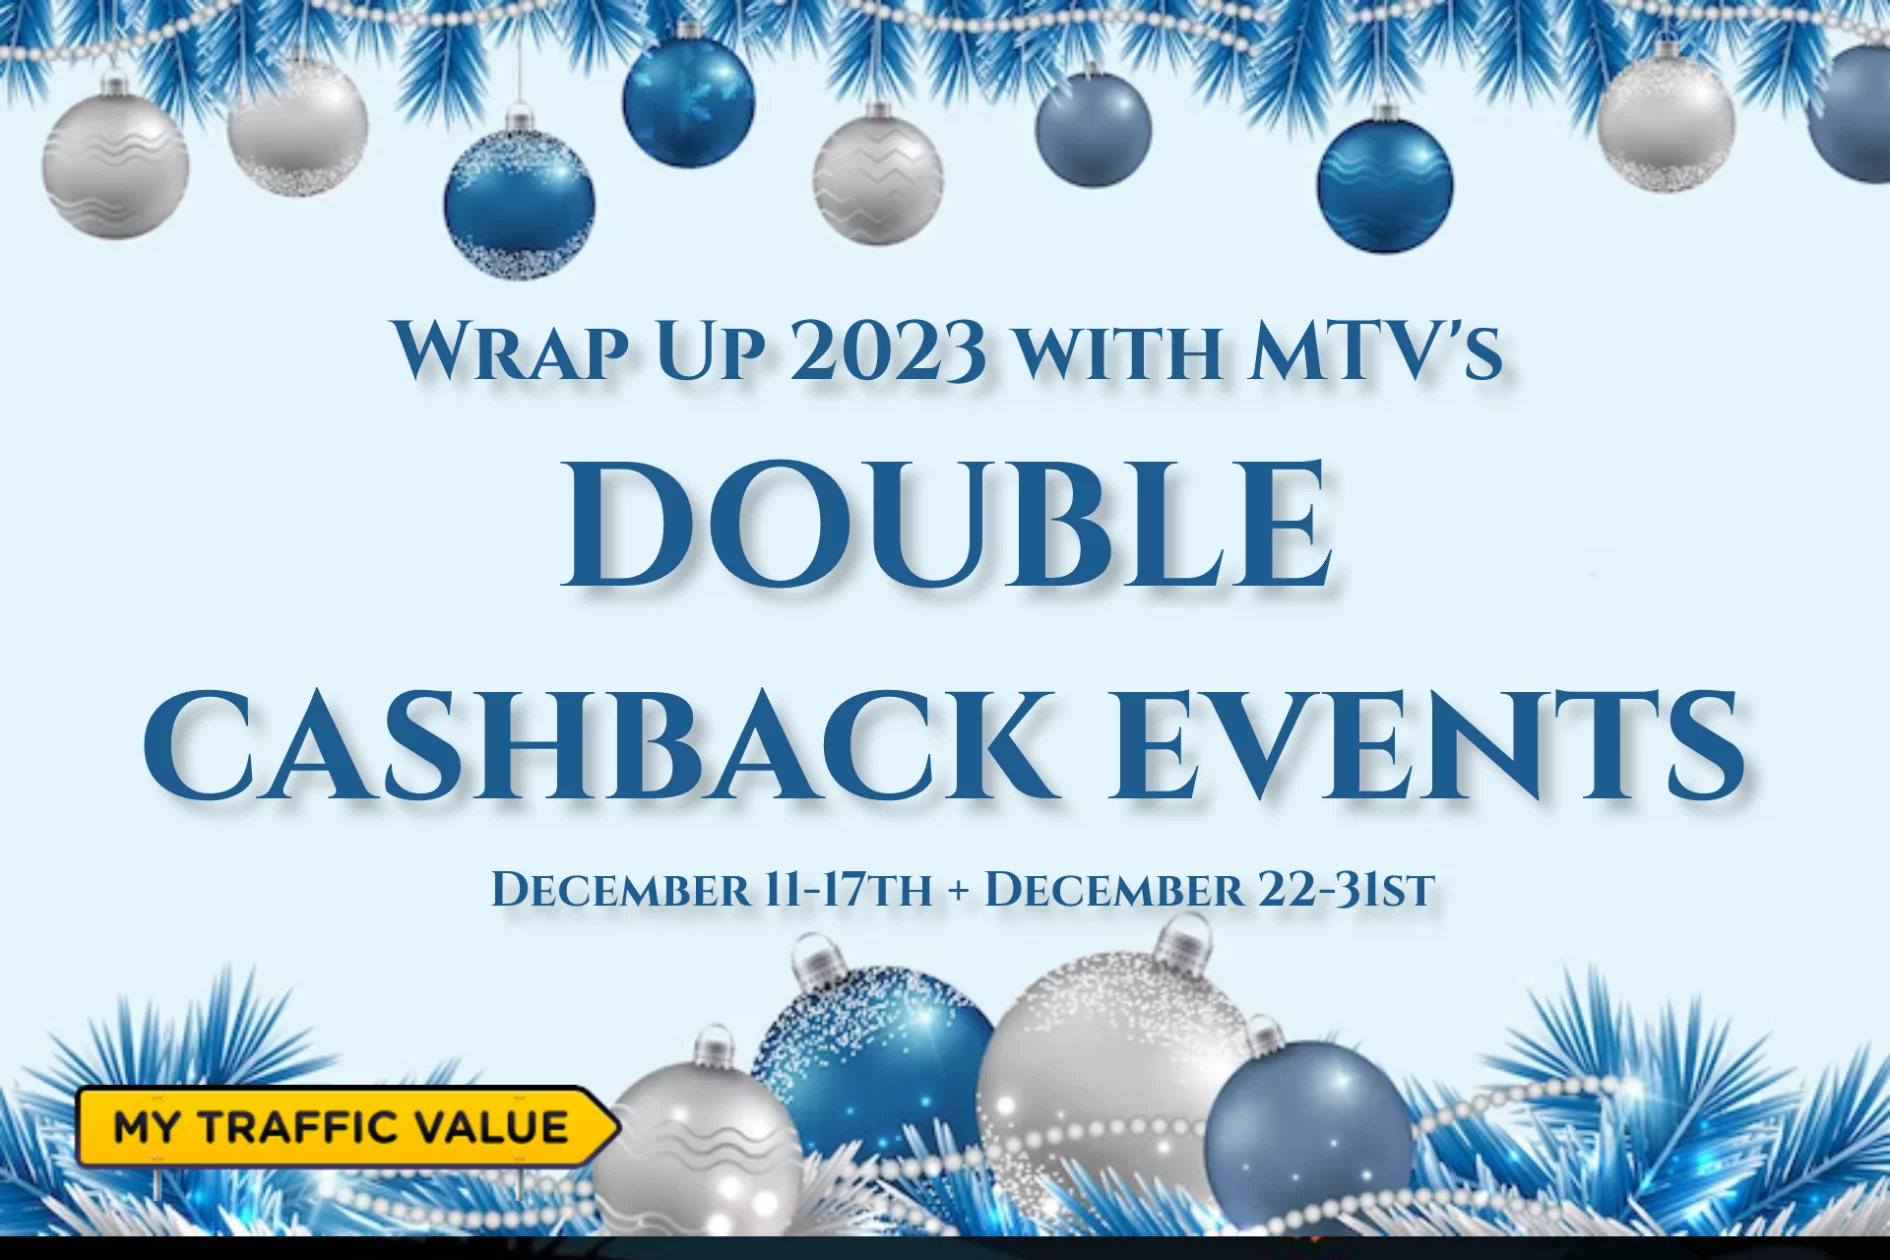 MTV’s Two Sensational Cashback Events to Wrap Up 2023!